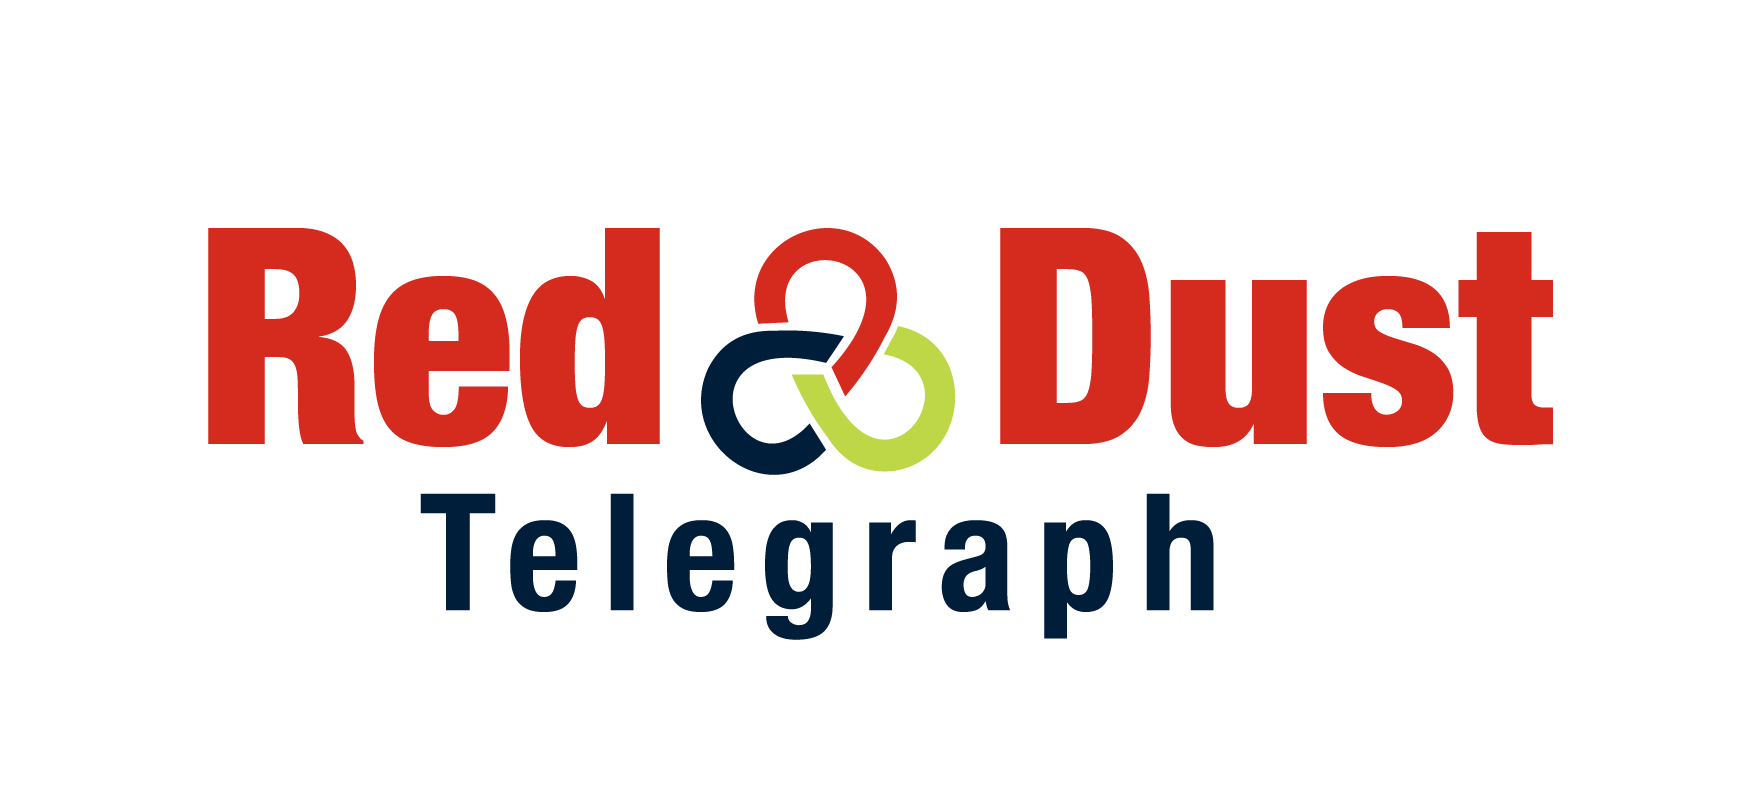 Red Dust Telegraph